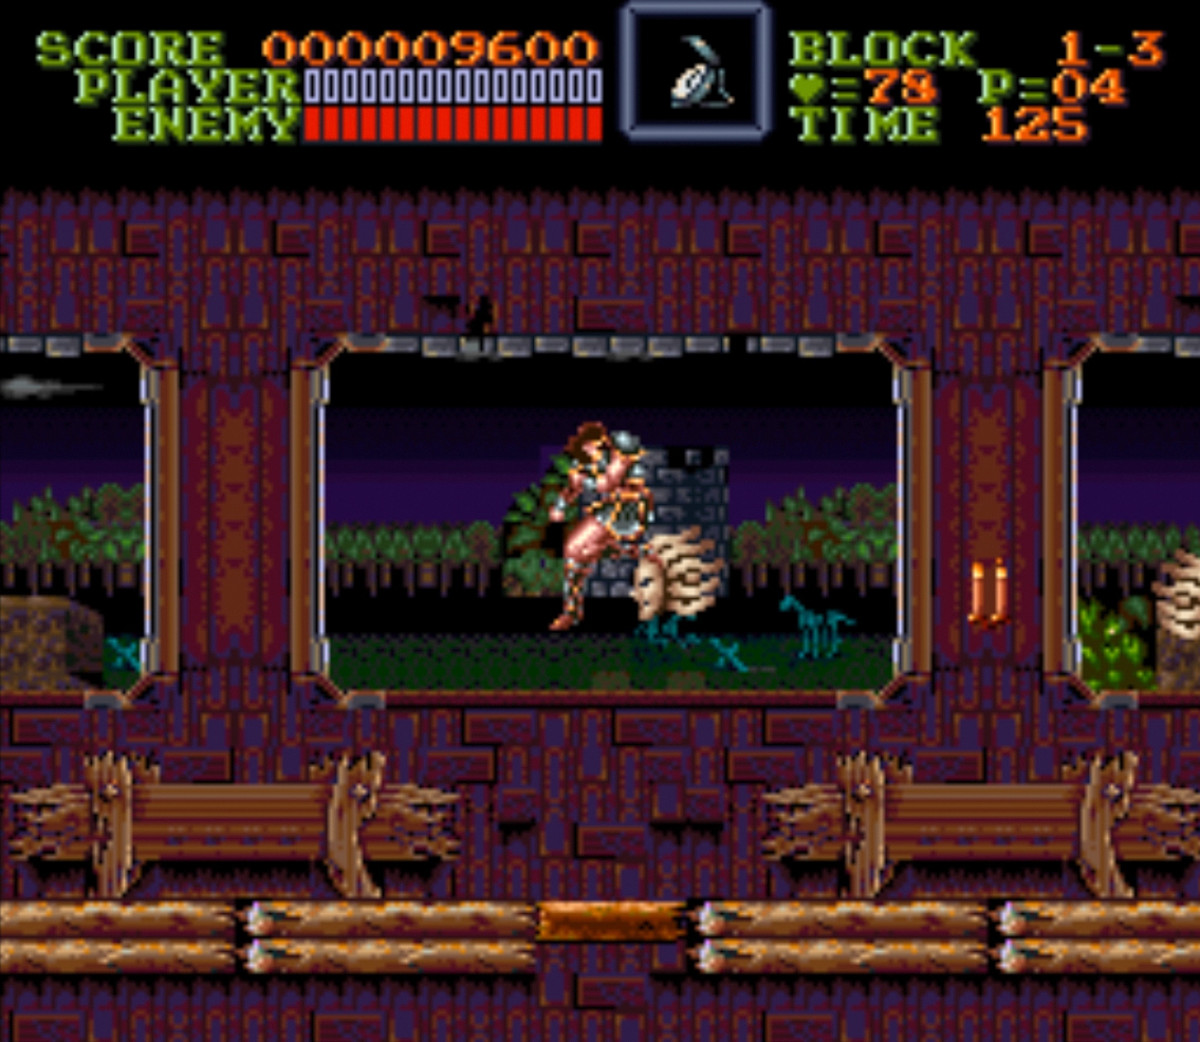 Fun Castlevania fact: Medusa heads have been a pain in the behind since the 80s.